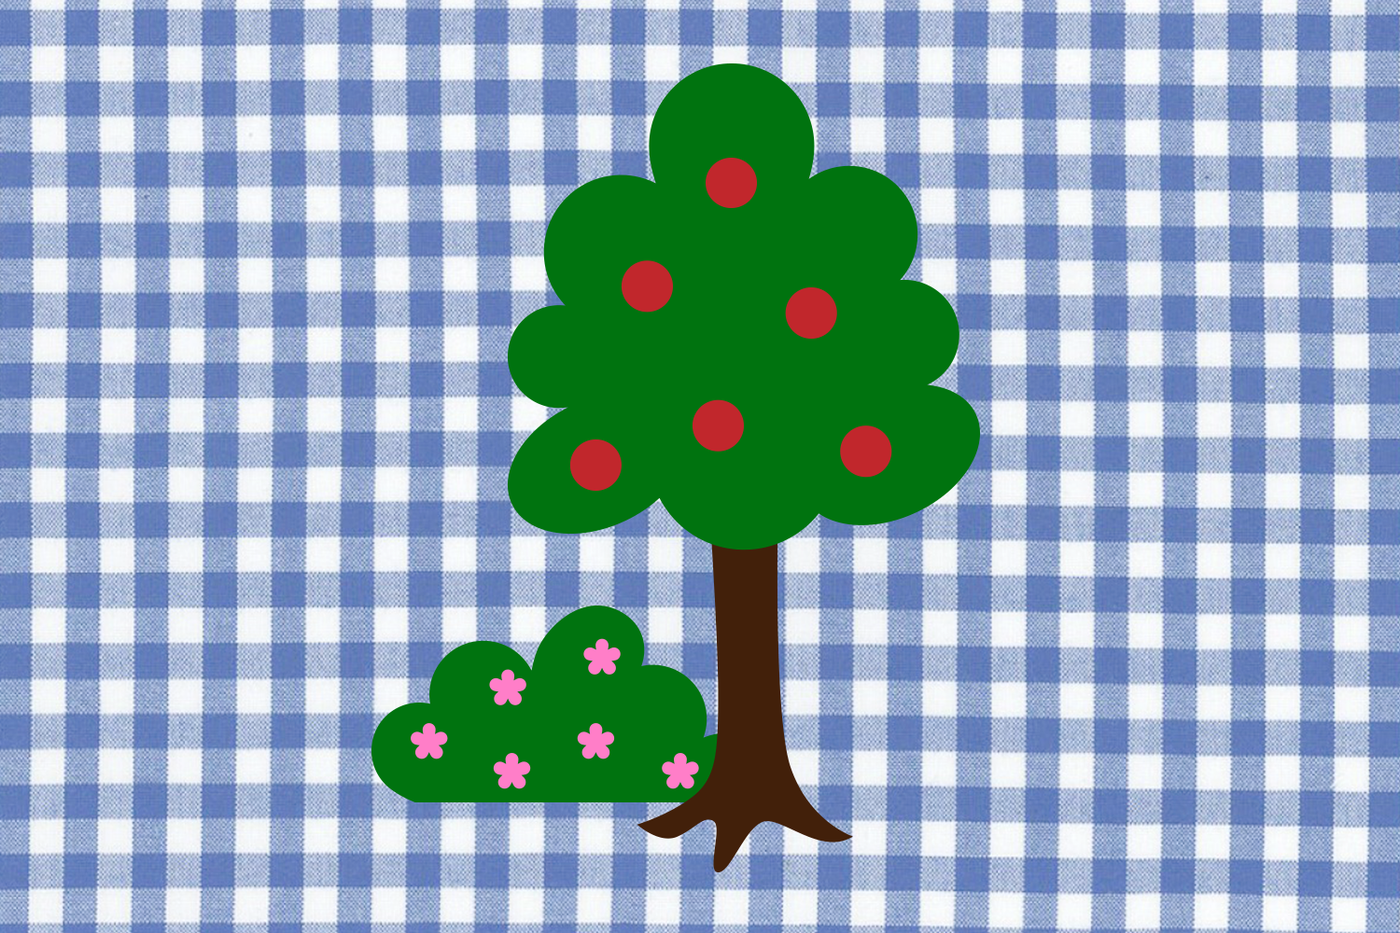 A paper fruit tree and shrub with flowers.